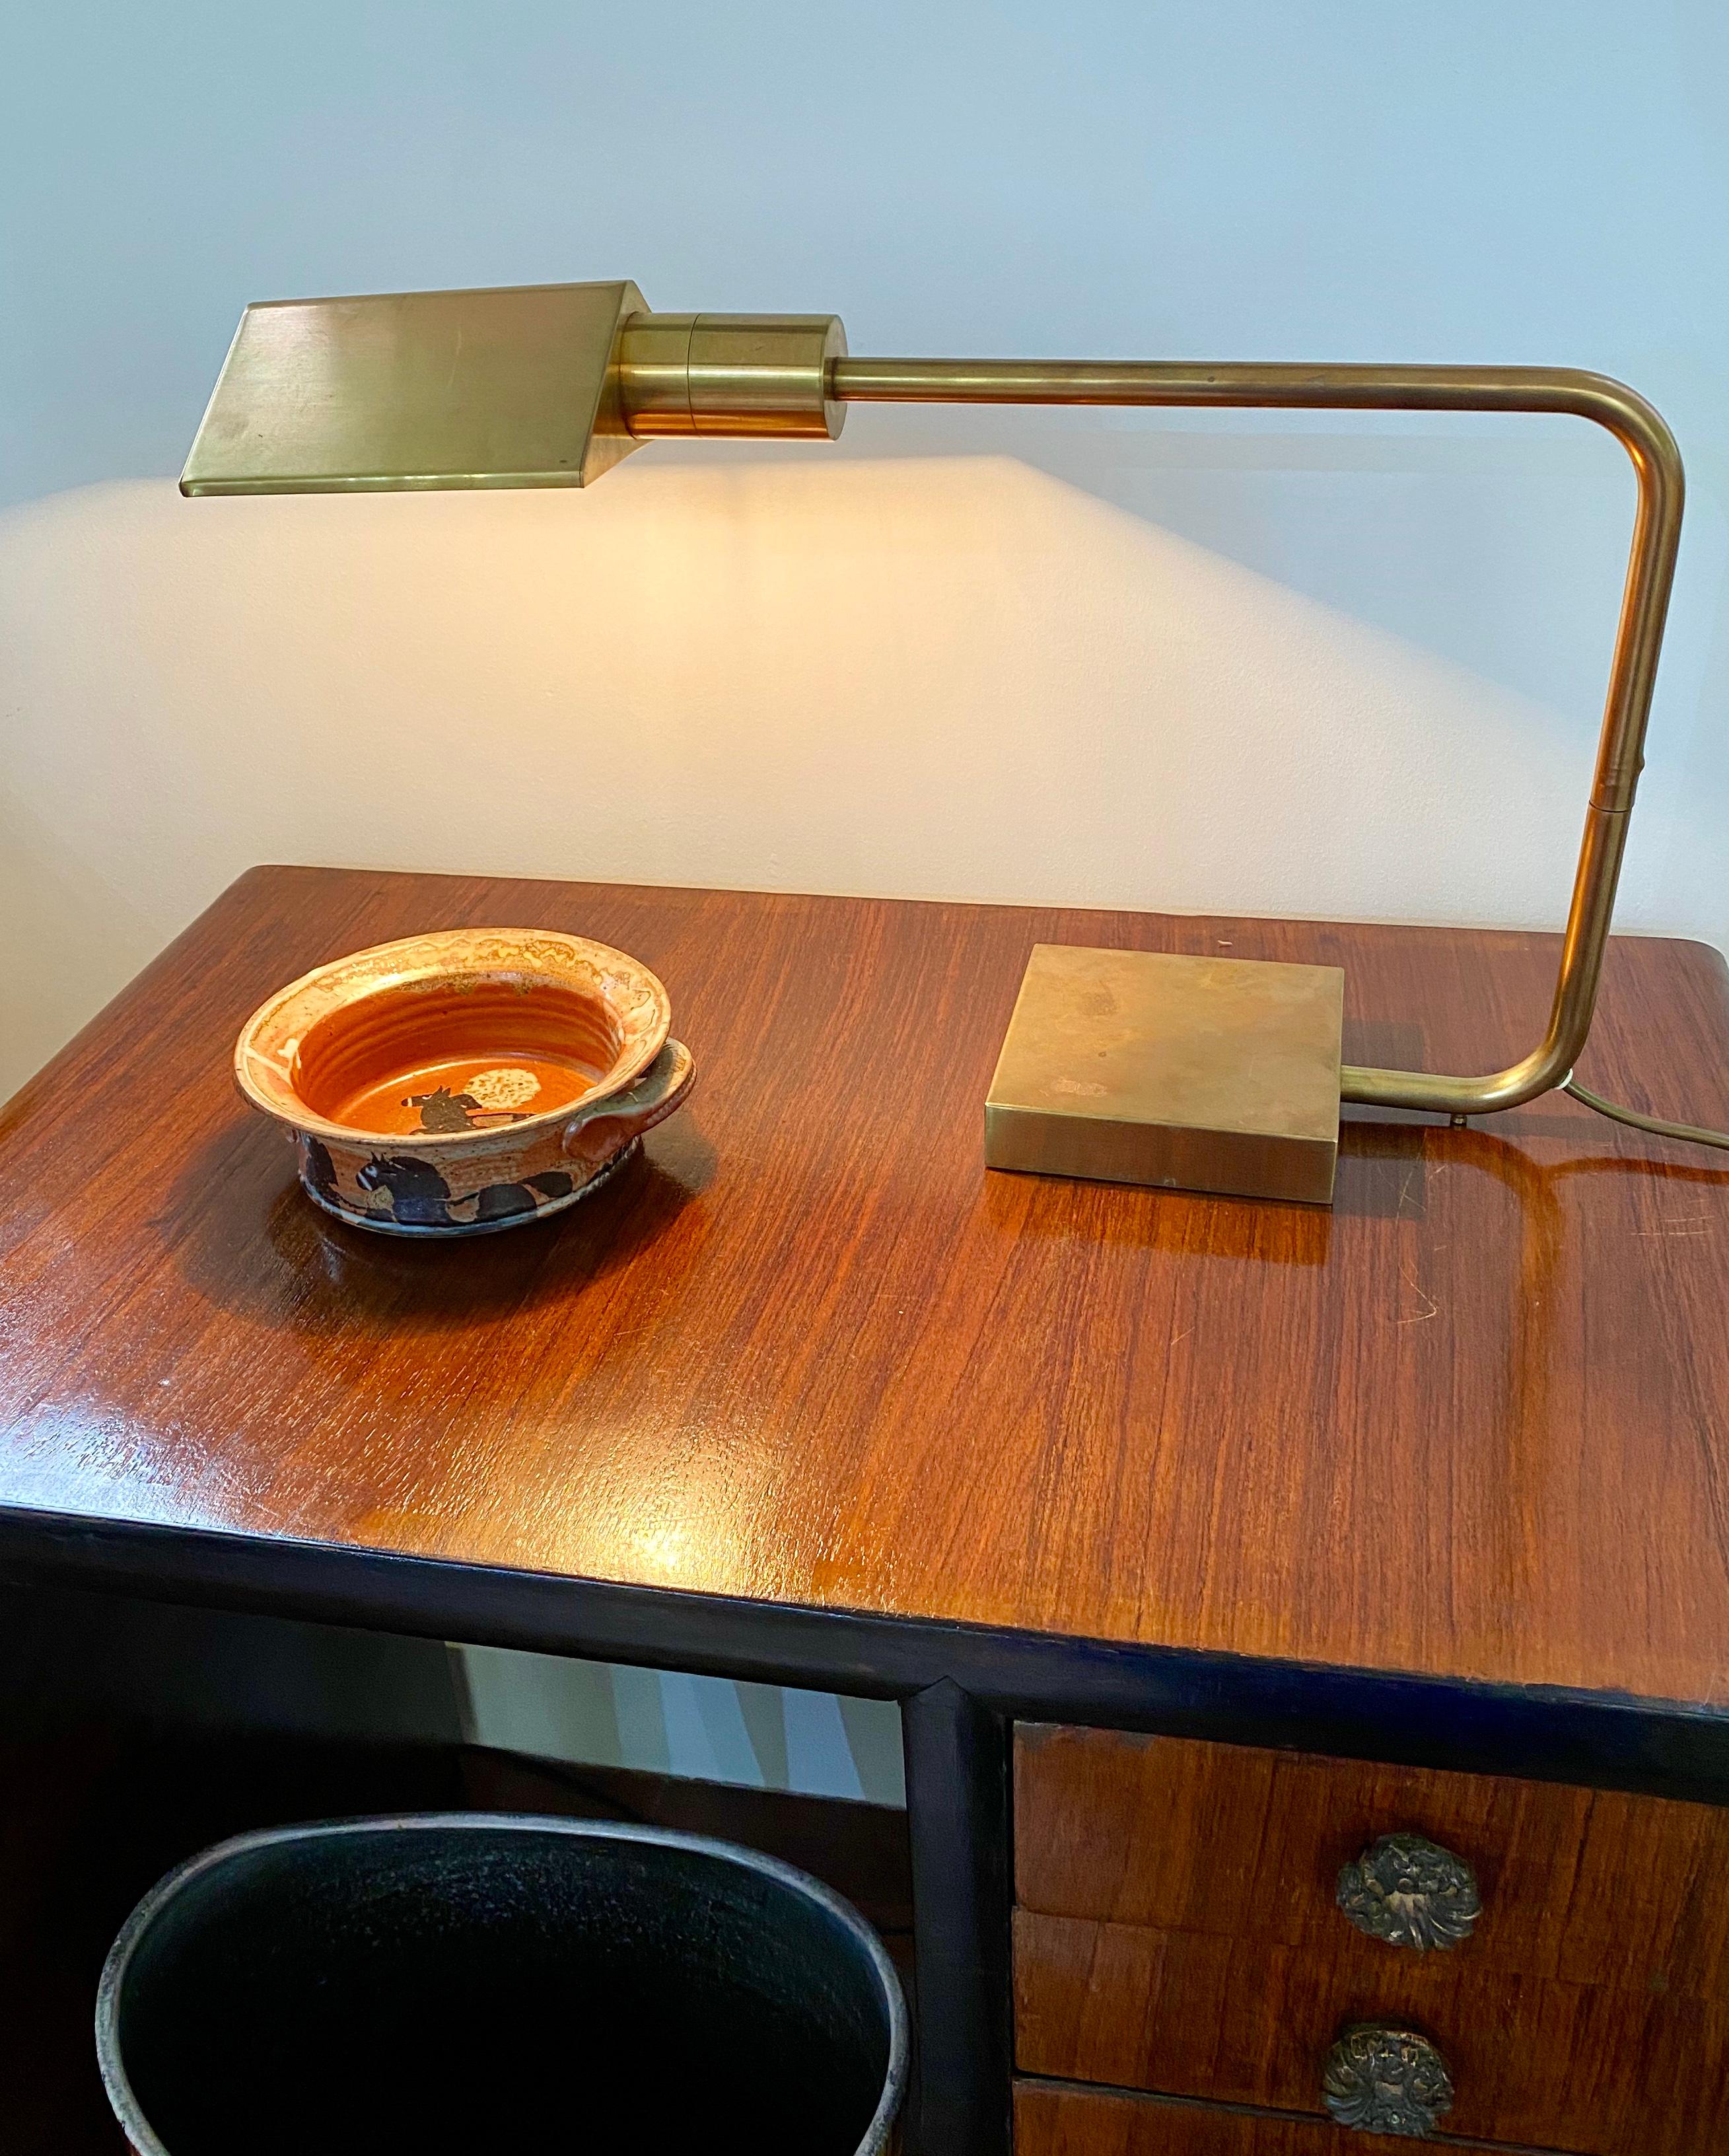 Italian midcentury brass desk lamp (circa 1950s). A classic desk lamp with modern detail and angled support member which swivels over the very weighty base. The brass features a characterful spotted patina throughout with characterful signs of age